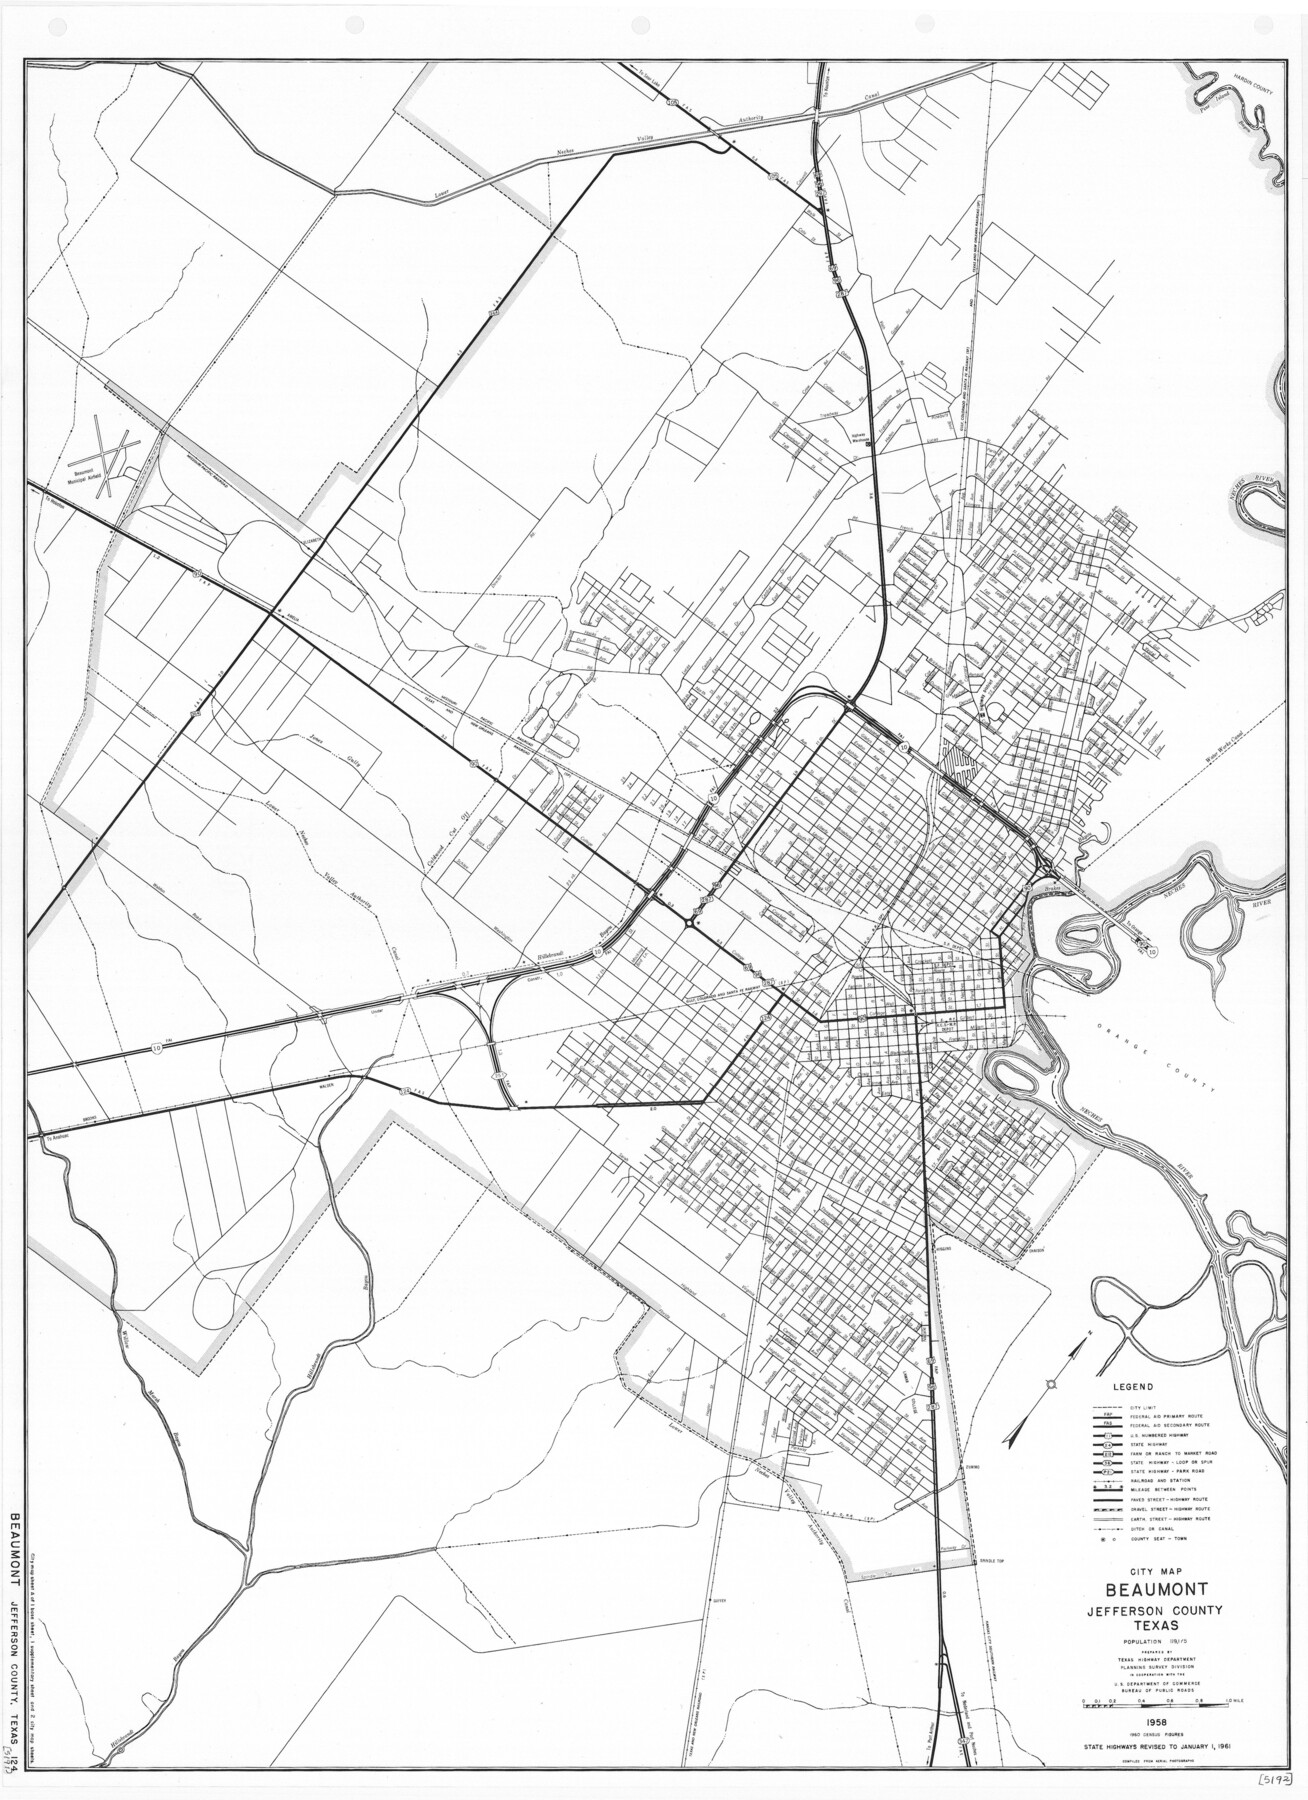 79539, General Highway Map.  Detail of Cities and Towns in Jefferson County, Texas.  City Map of Beaumont, Jefferson County, Texas, Texas State Library and Archives